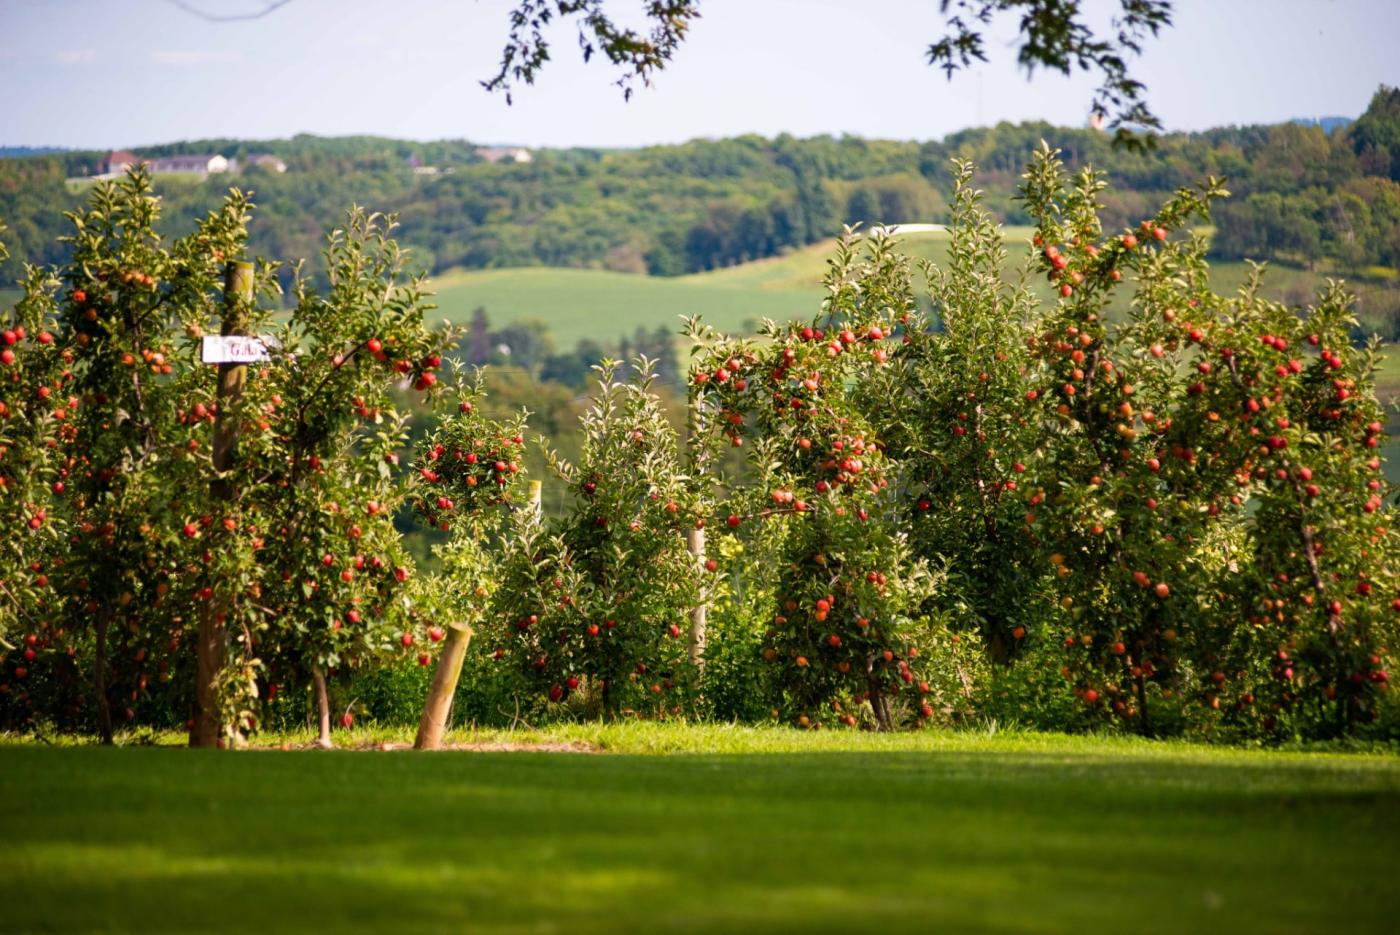 Apple orchard at Hillcrest Orchard in Walnut Creek, Ohio